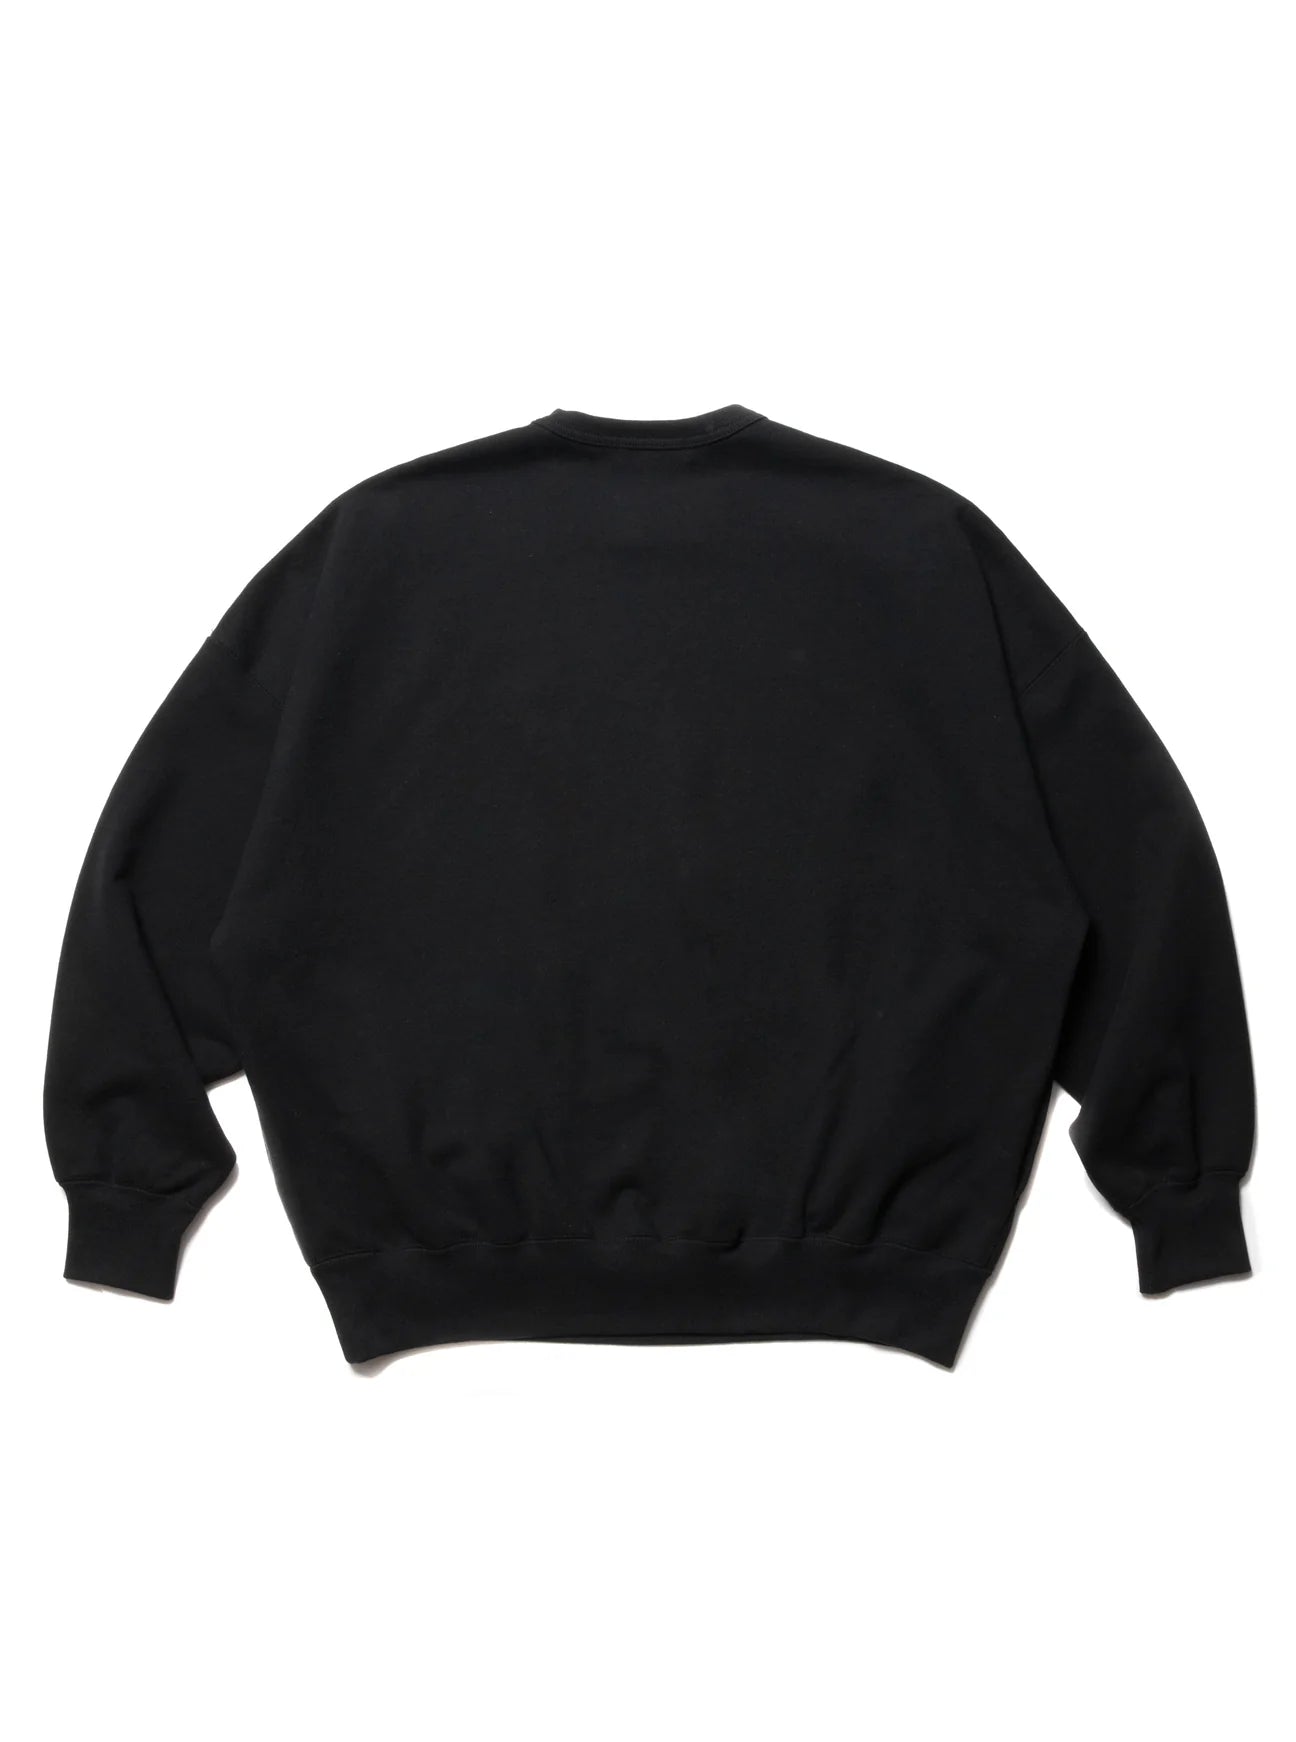 COOTIE PRODUCTIONS OPEN END YARN PLAIN SWEAT CREW